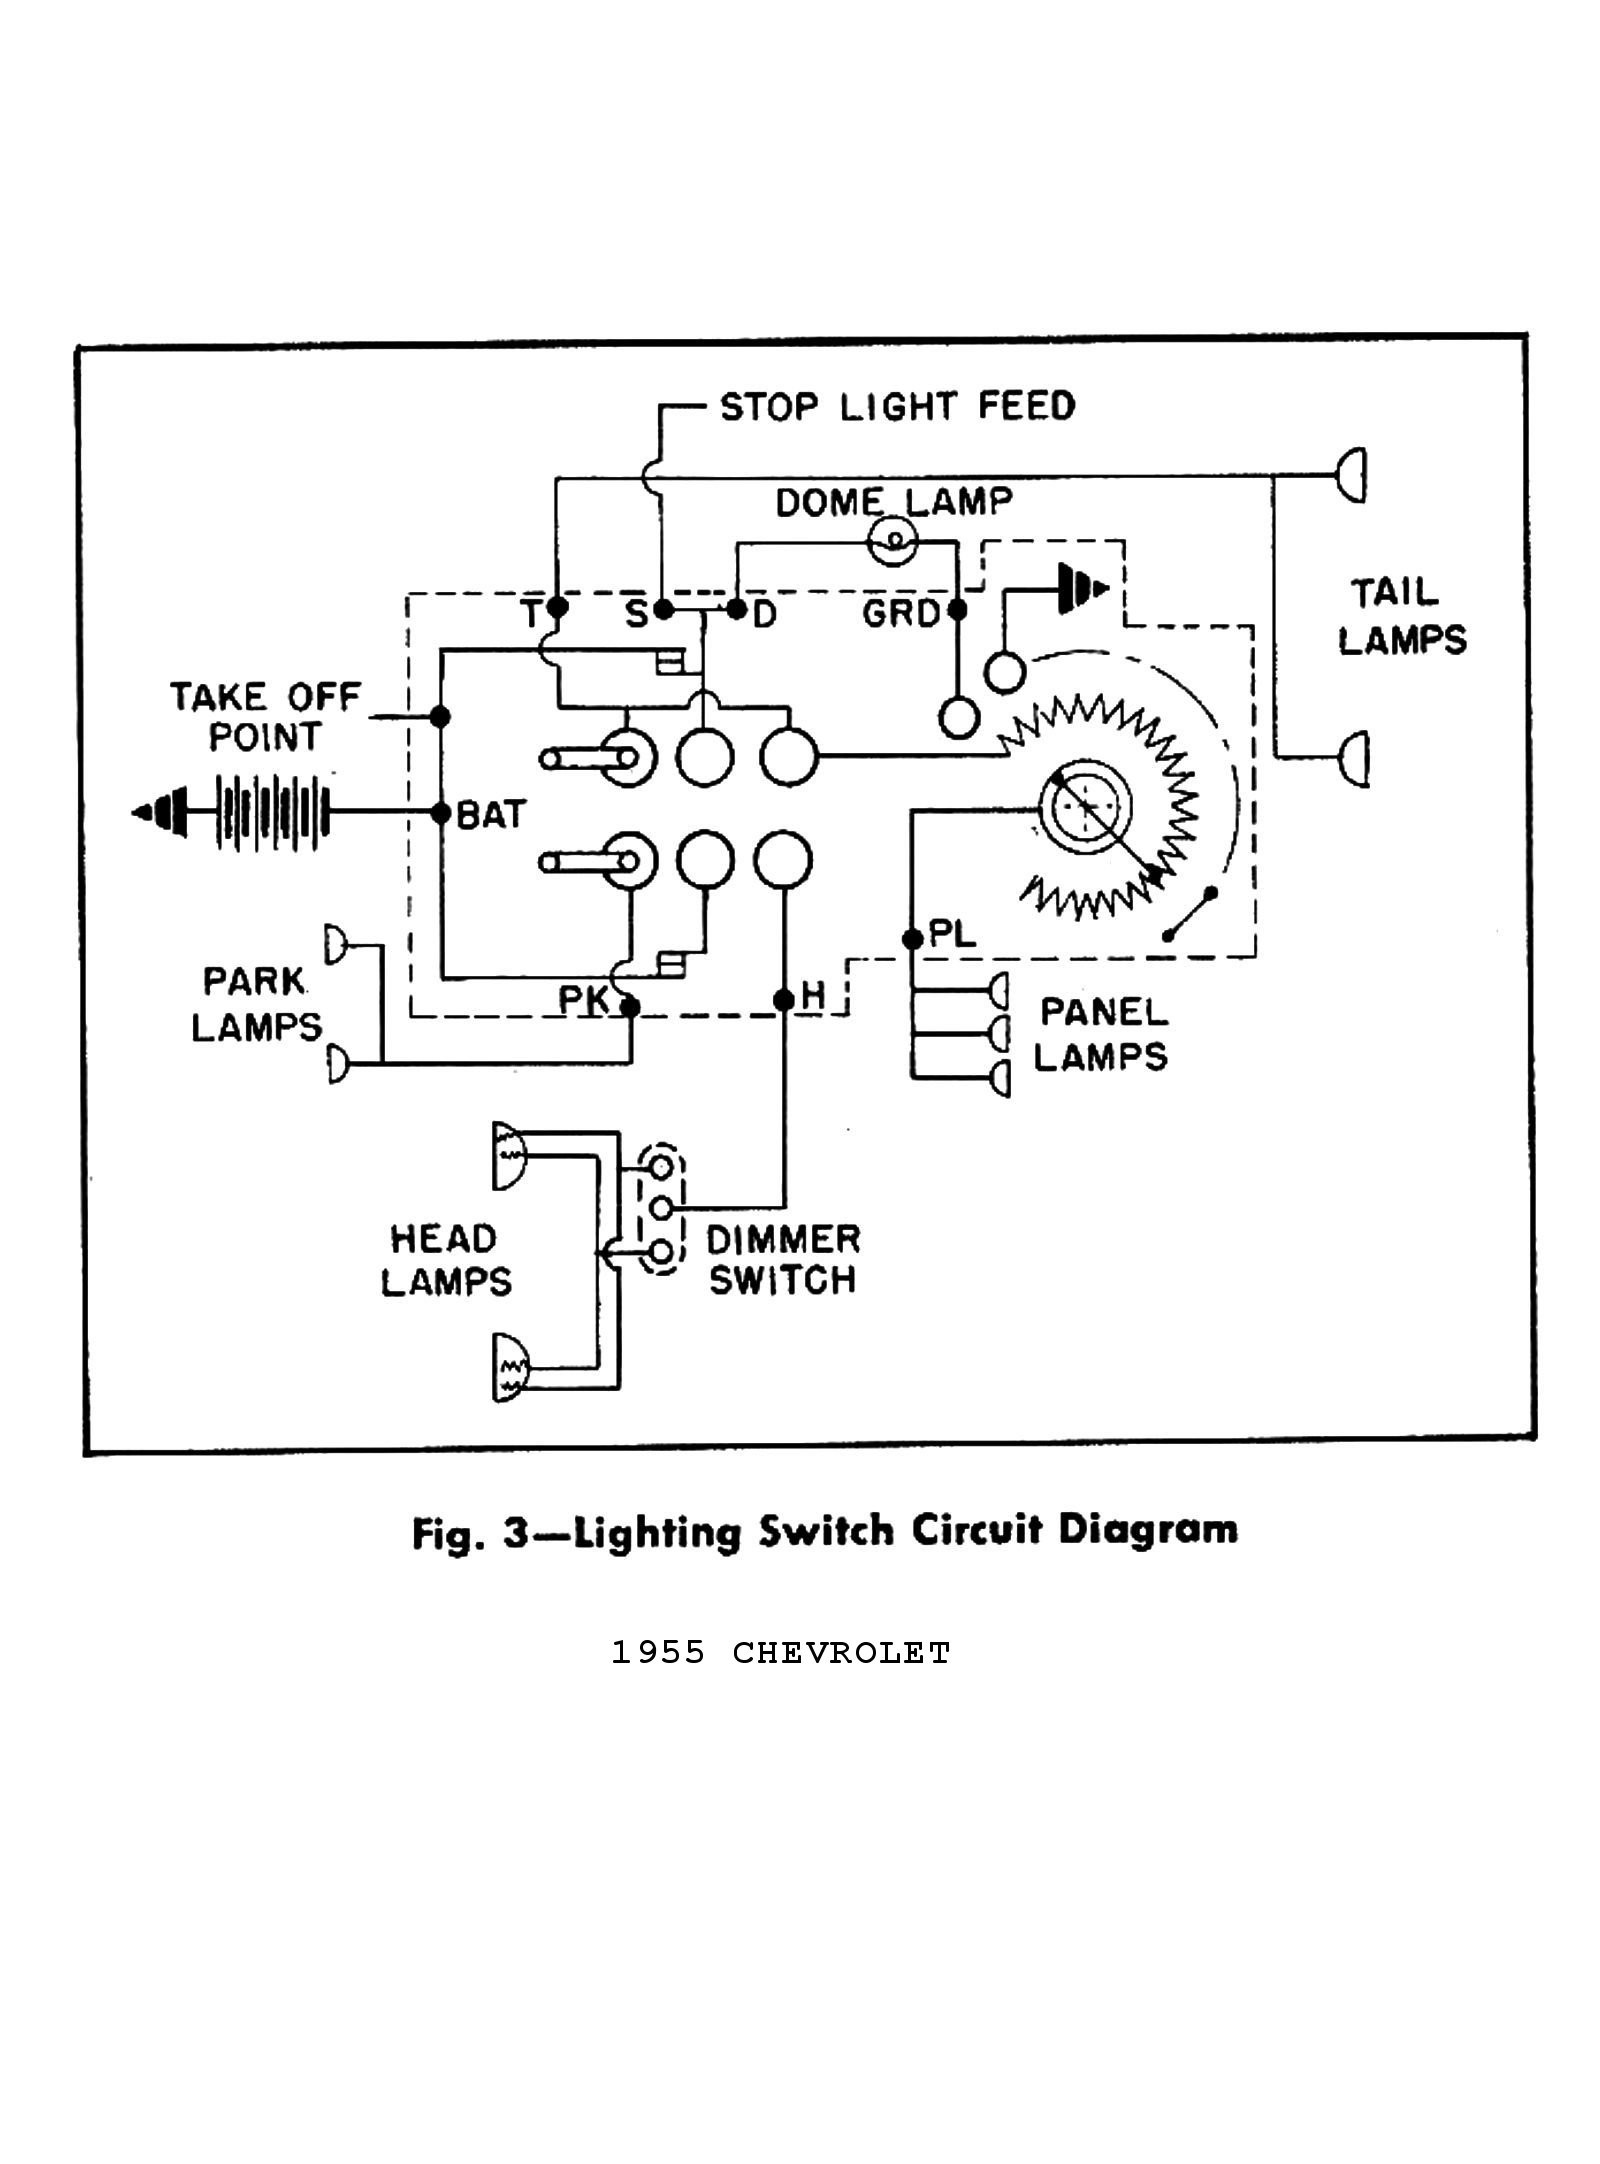 Ignition Switch Wiring Diagram Chevy Wiring Diagram Ignition Switch Chevy Free Extraordinary Blurts Of Ignition Switch Wiring Diagram Chevy